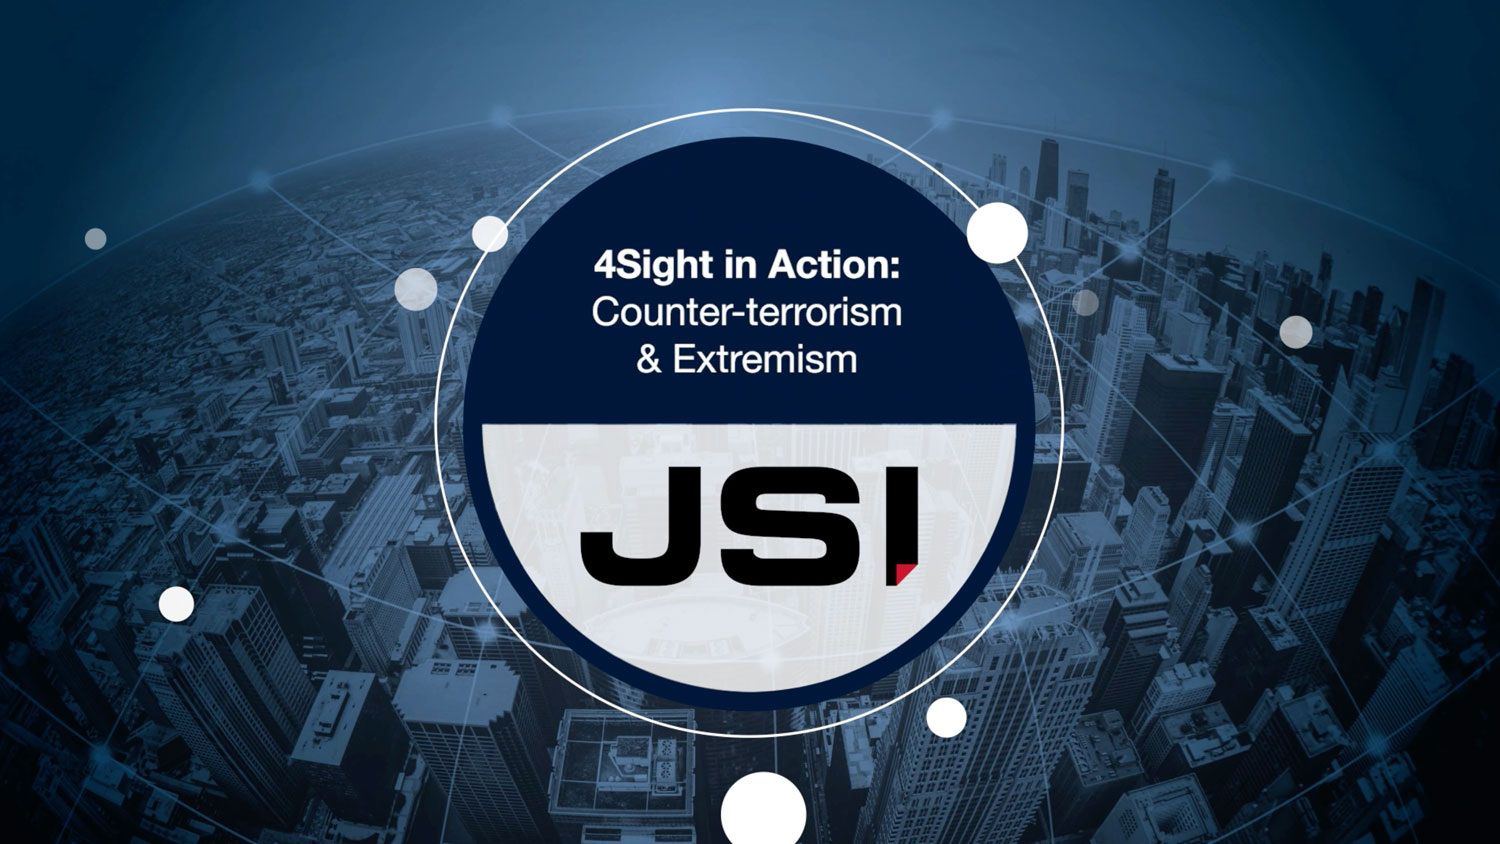 thumbnail image for a video that says 4Sight in Action: Counter-terrorism & Extremism 